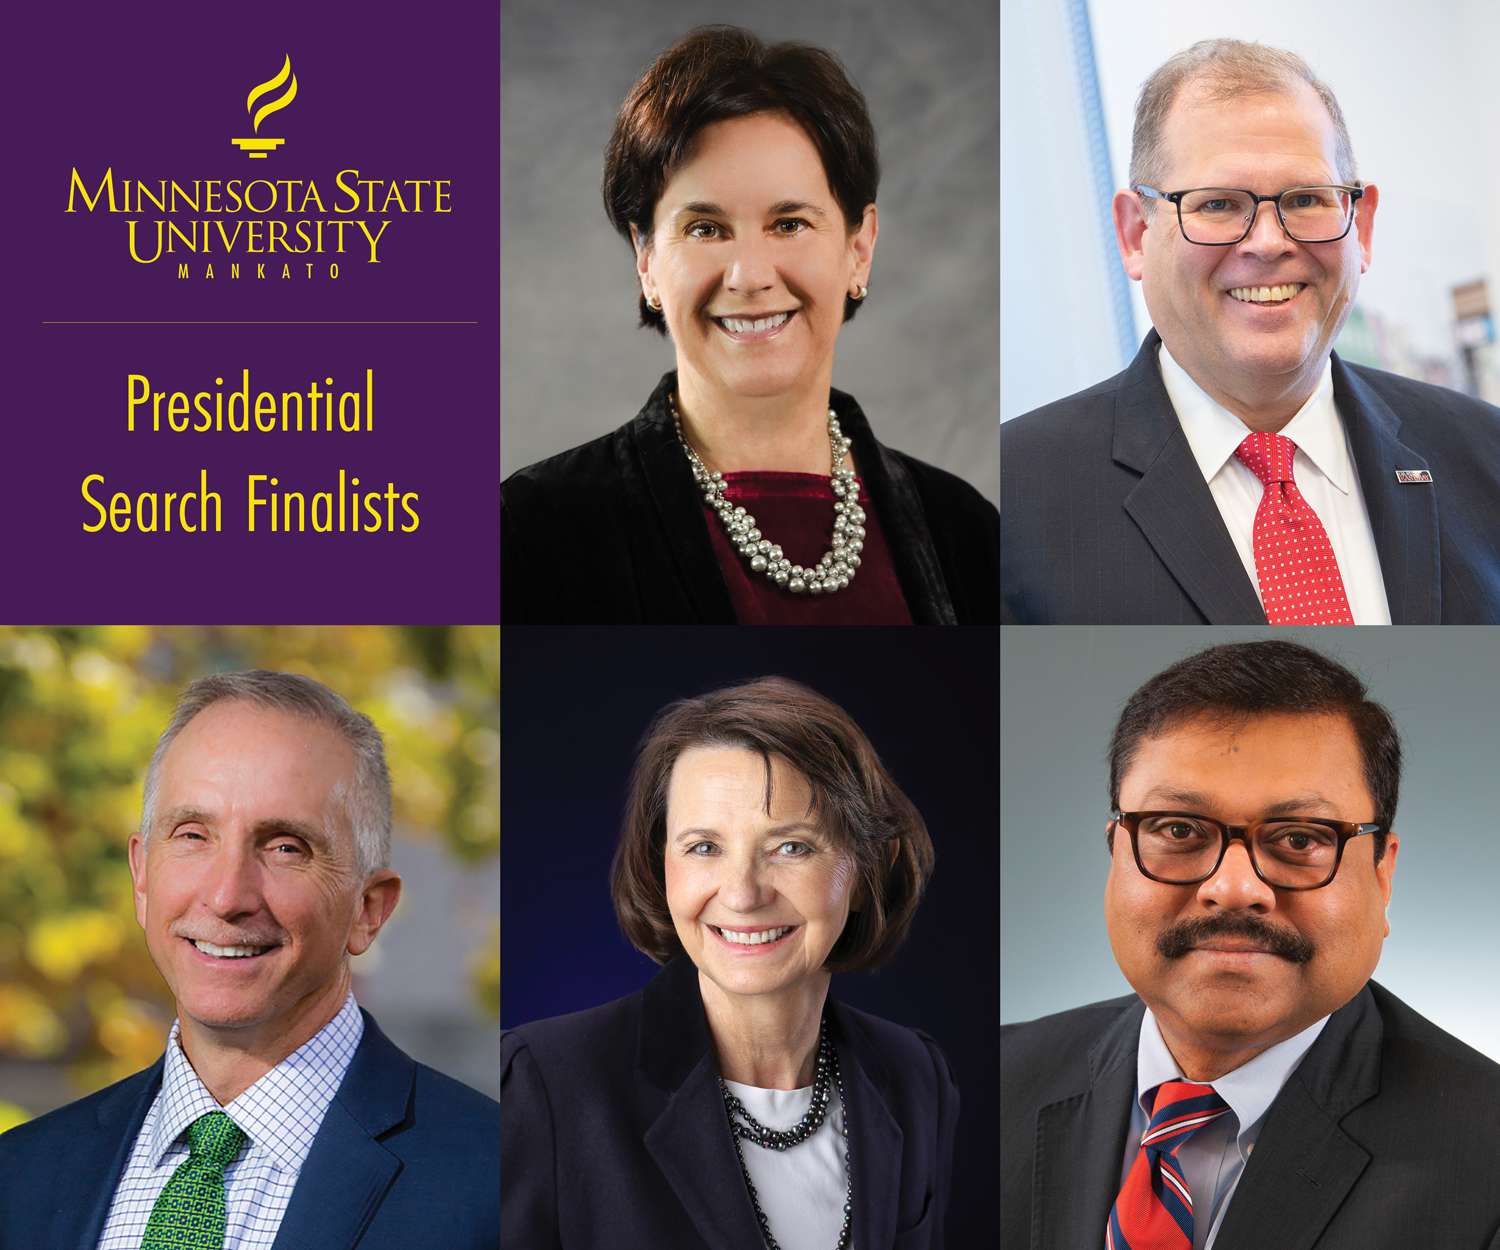 President Finalists Named